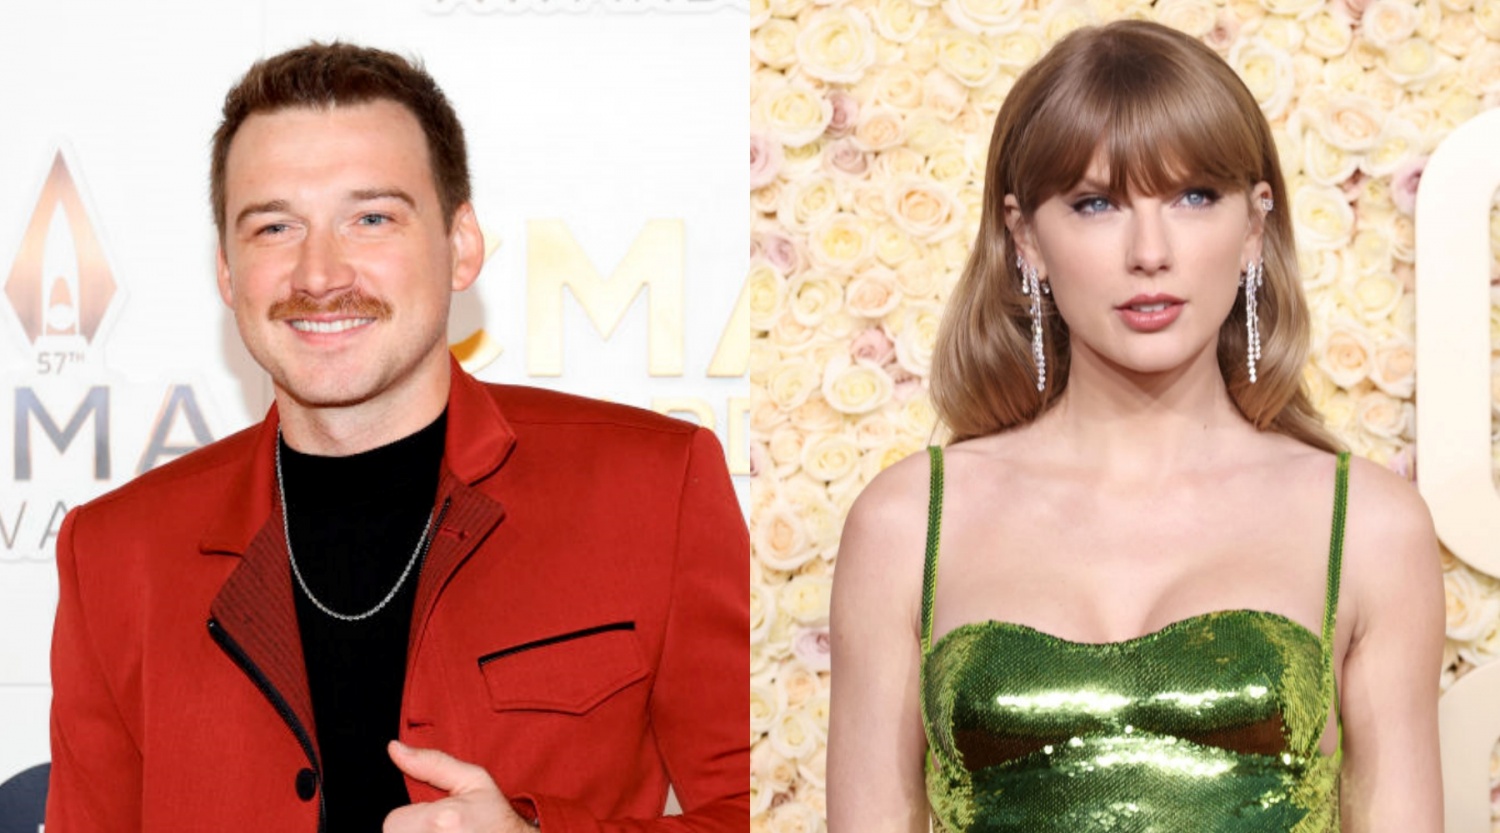 Morgan Wallen's Fans Booed After Singer Mentioned Taylor Swift